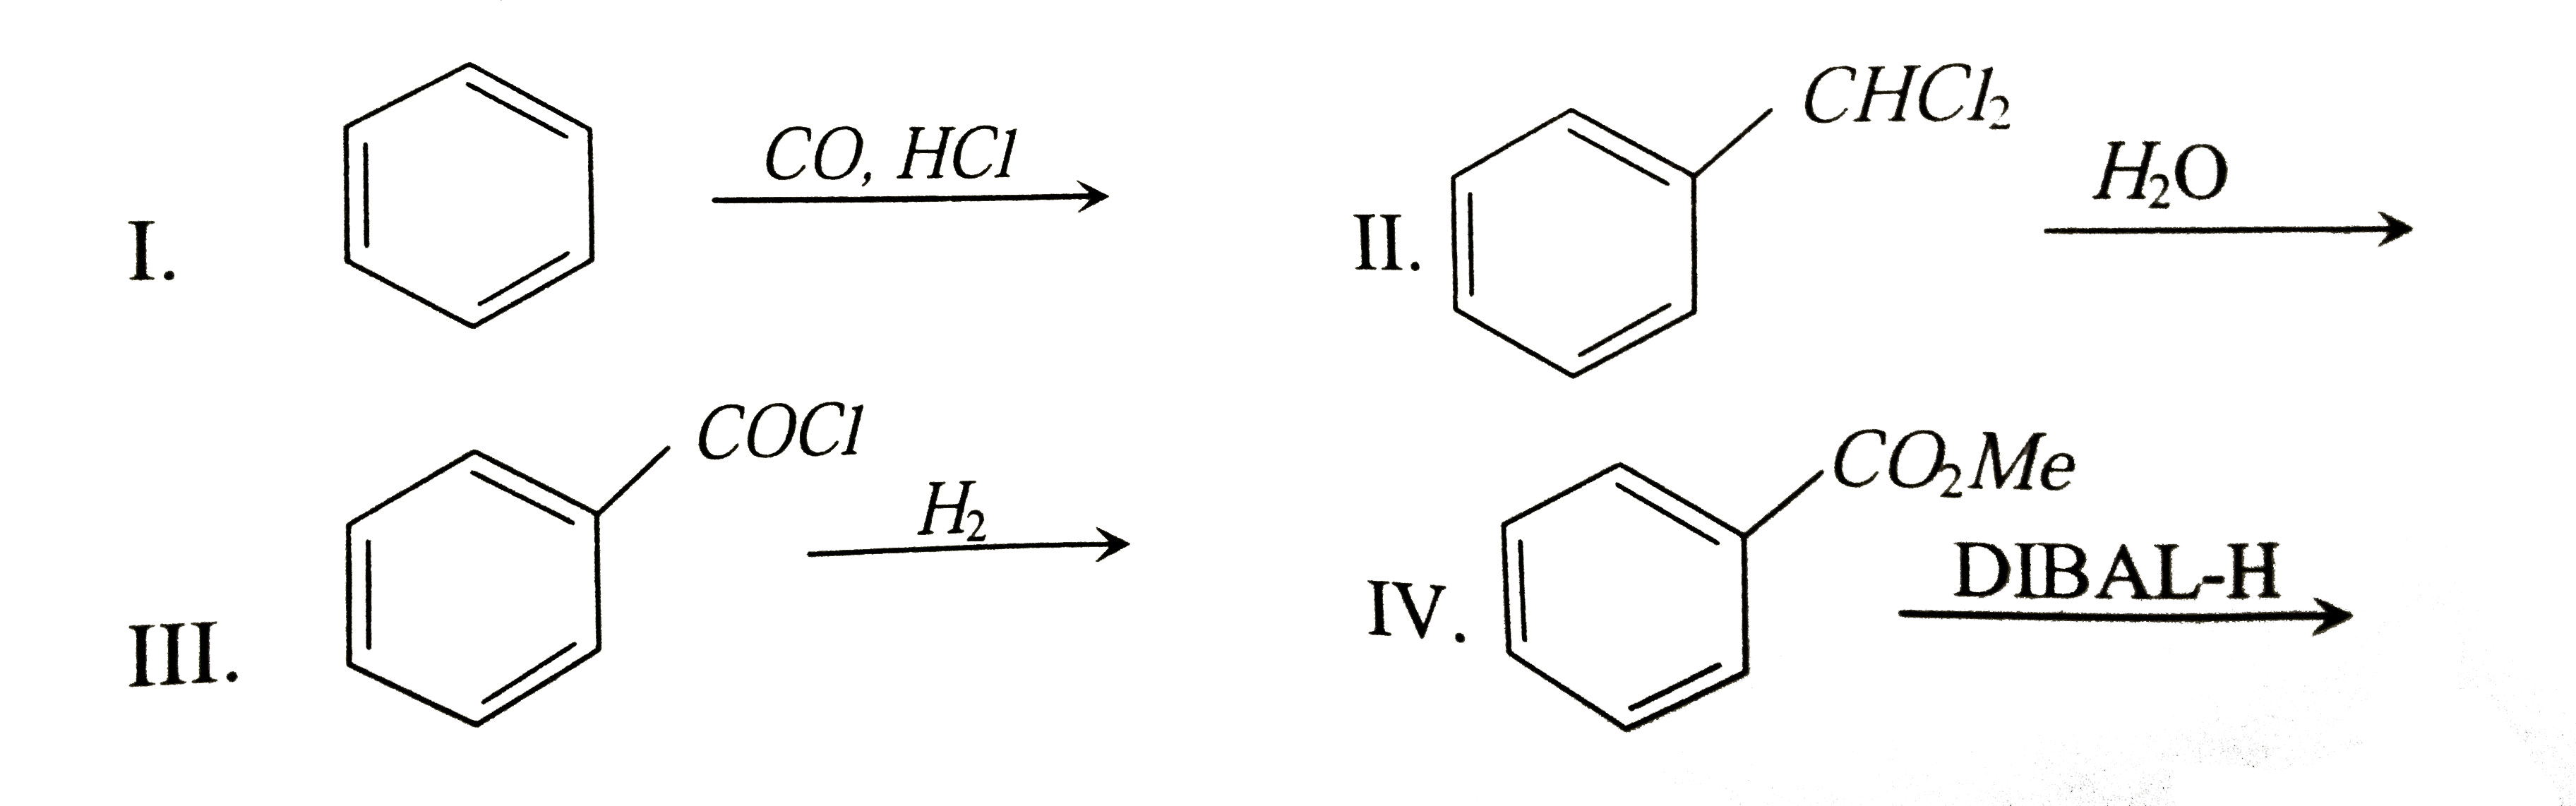 Among the following the number of reaction(s) that produce(s) benzaldehyde is